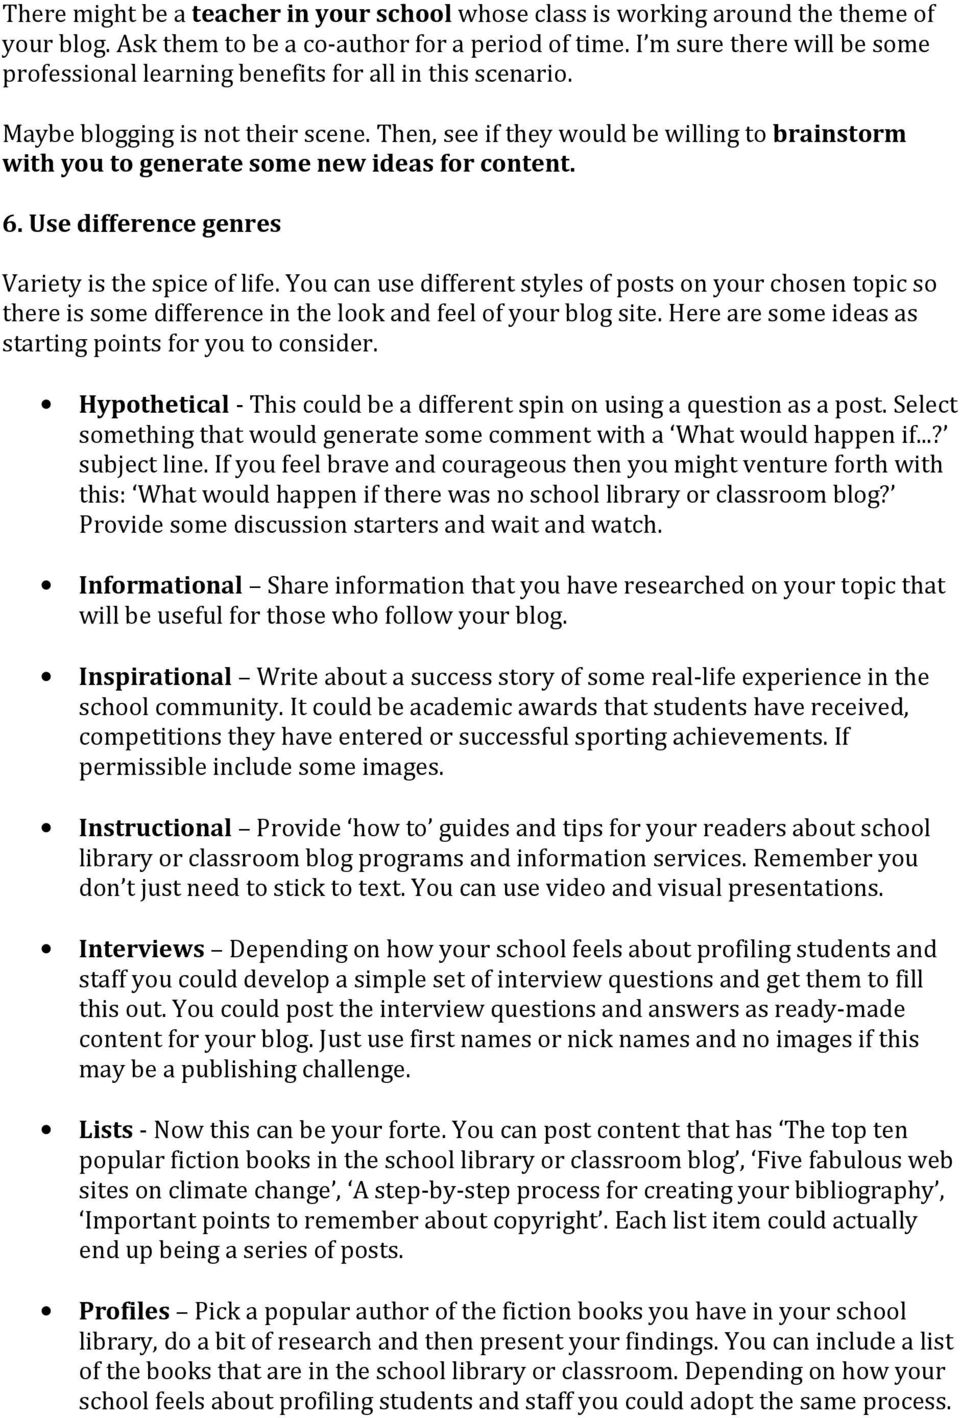 How to Have a Successful School Library or Classroom Blog. By